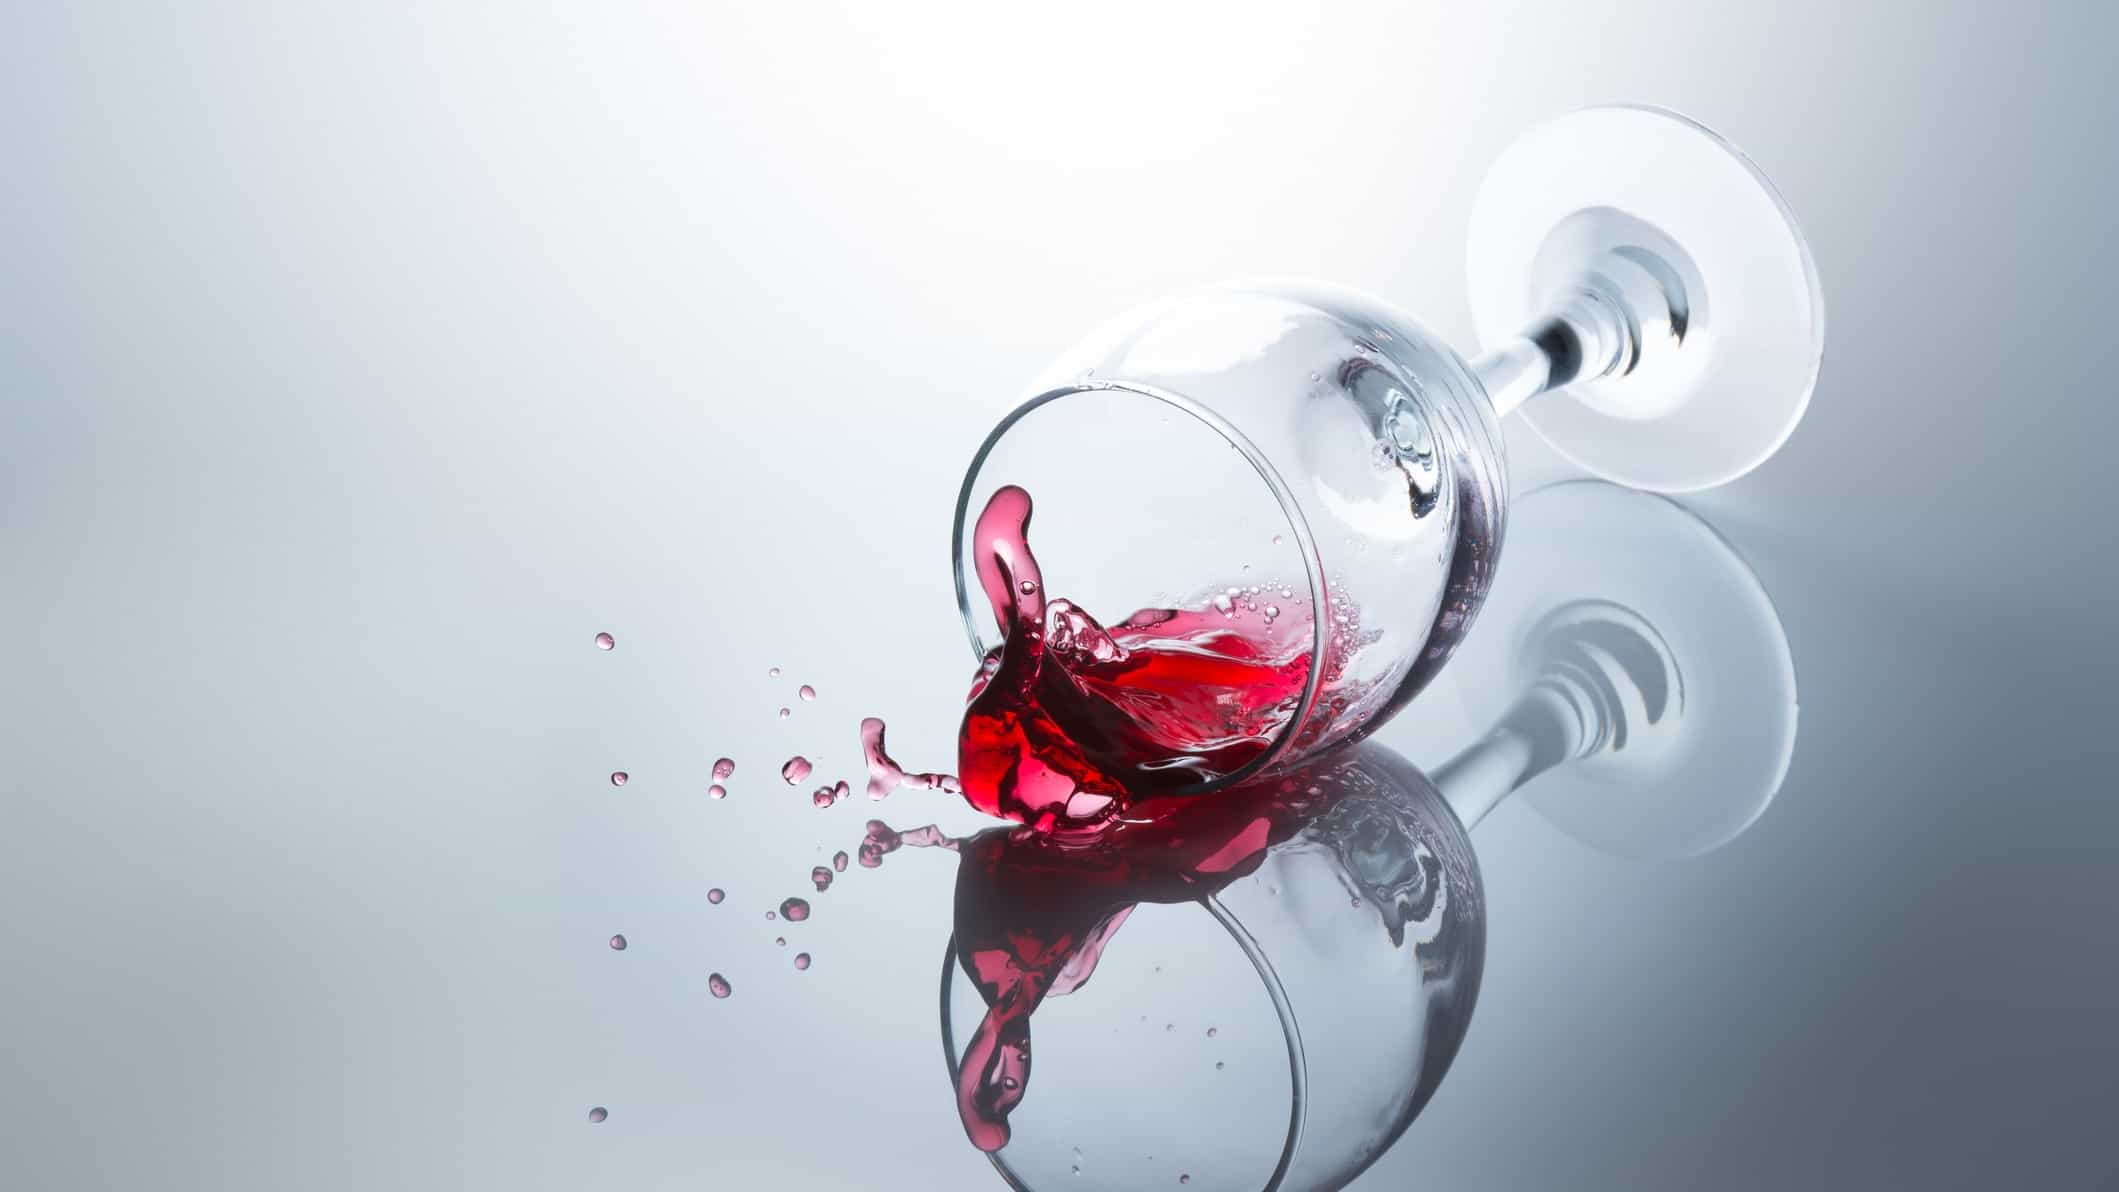 Spilled wine and a glass on its side, indicating a share price drop for ASX wine companies